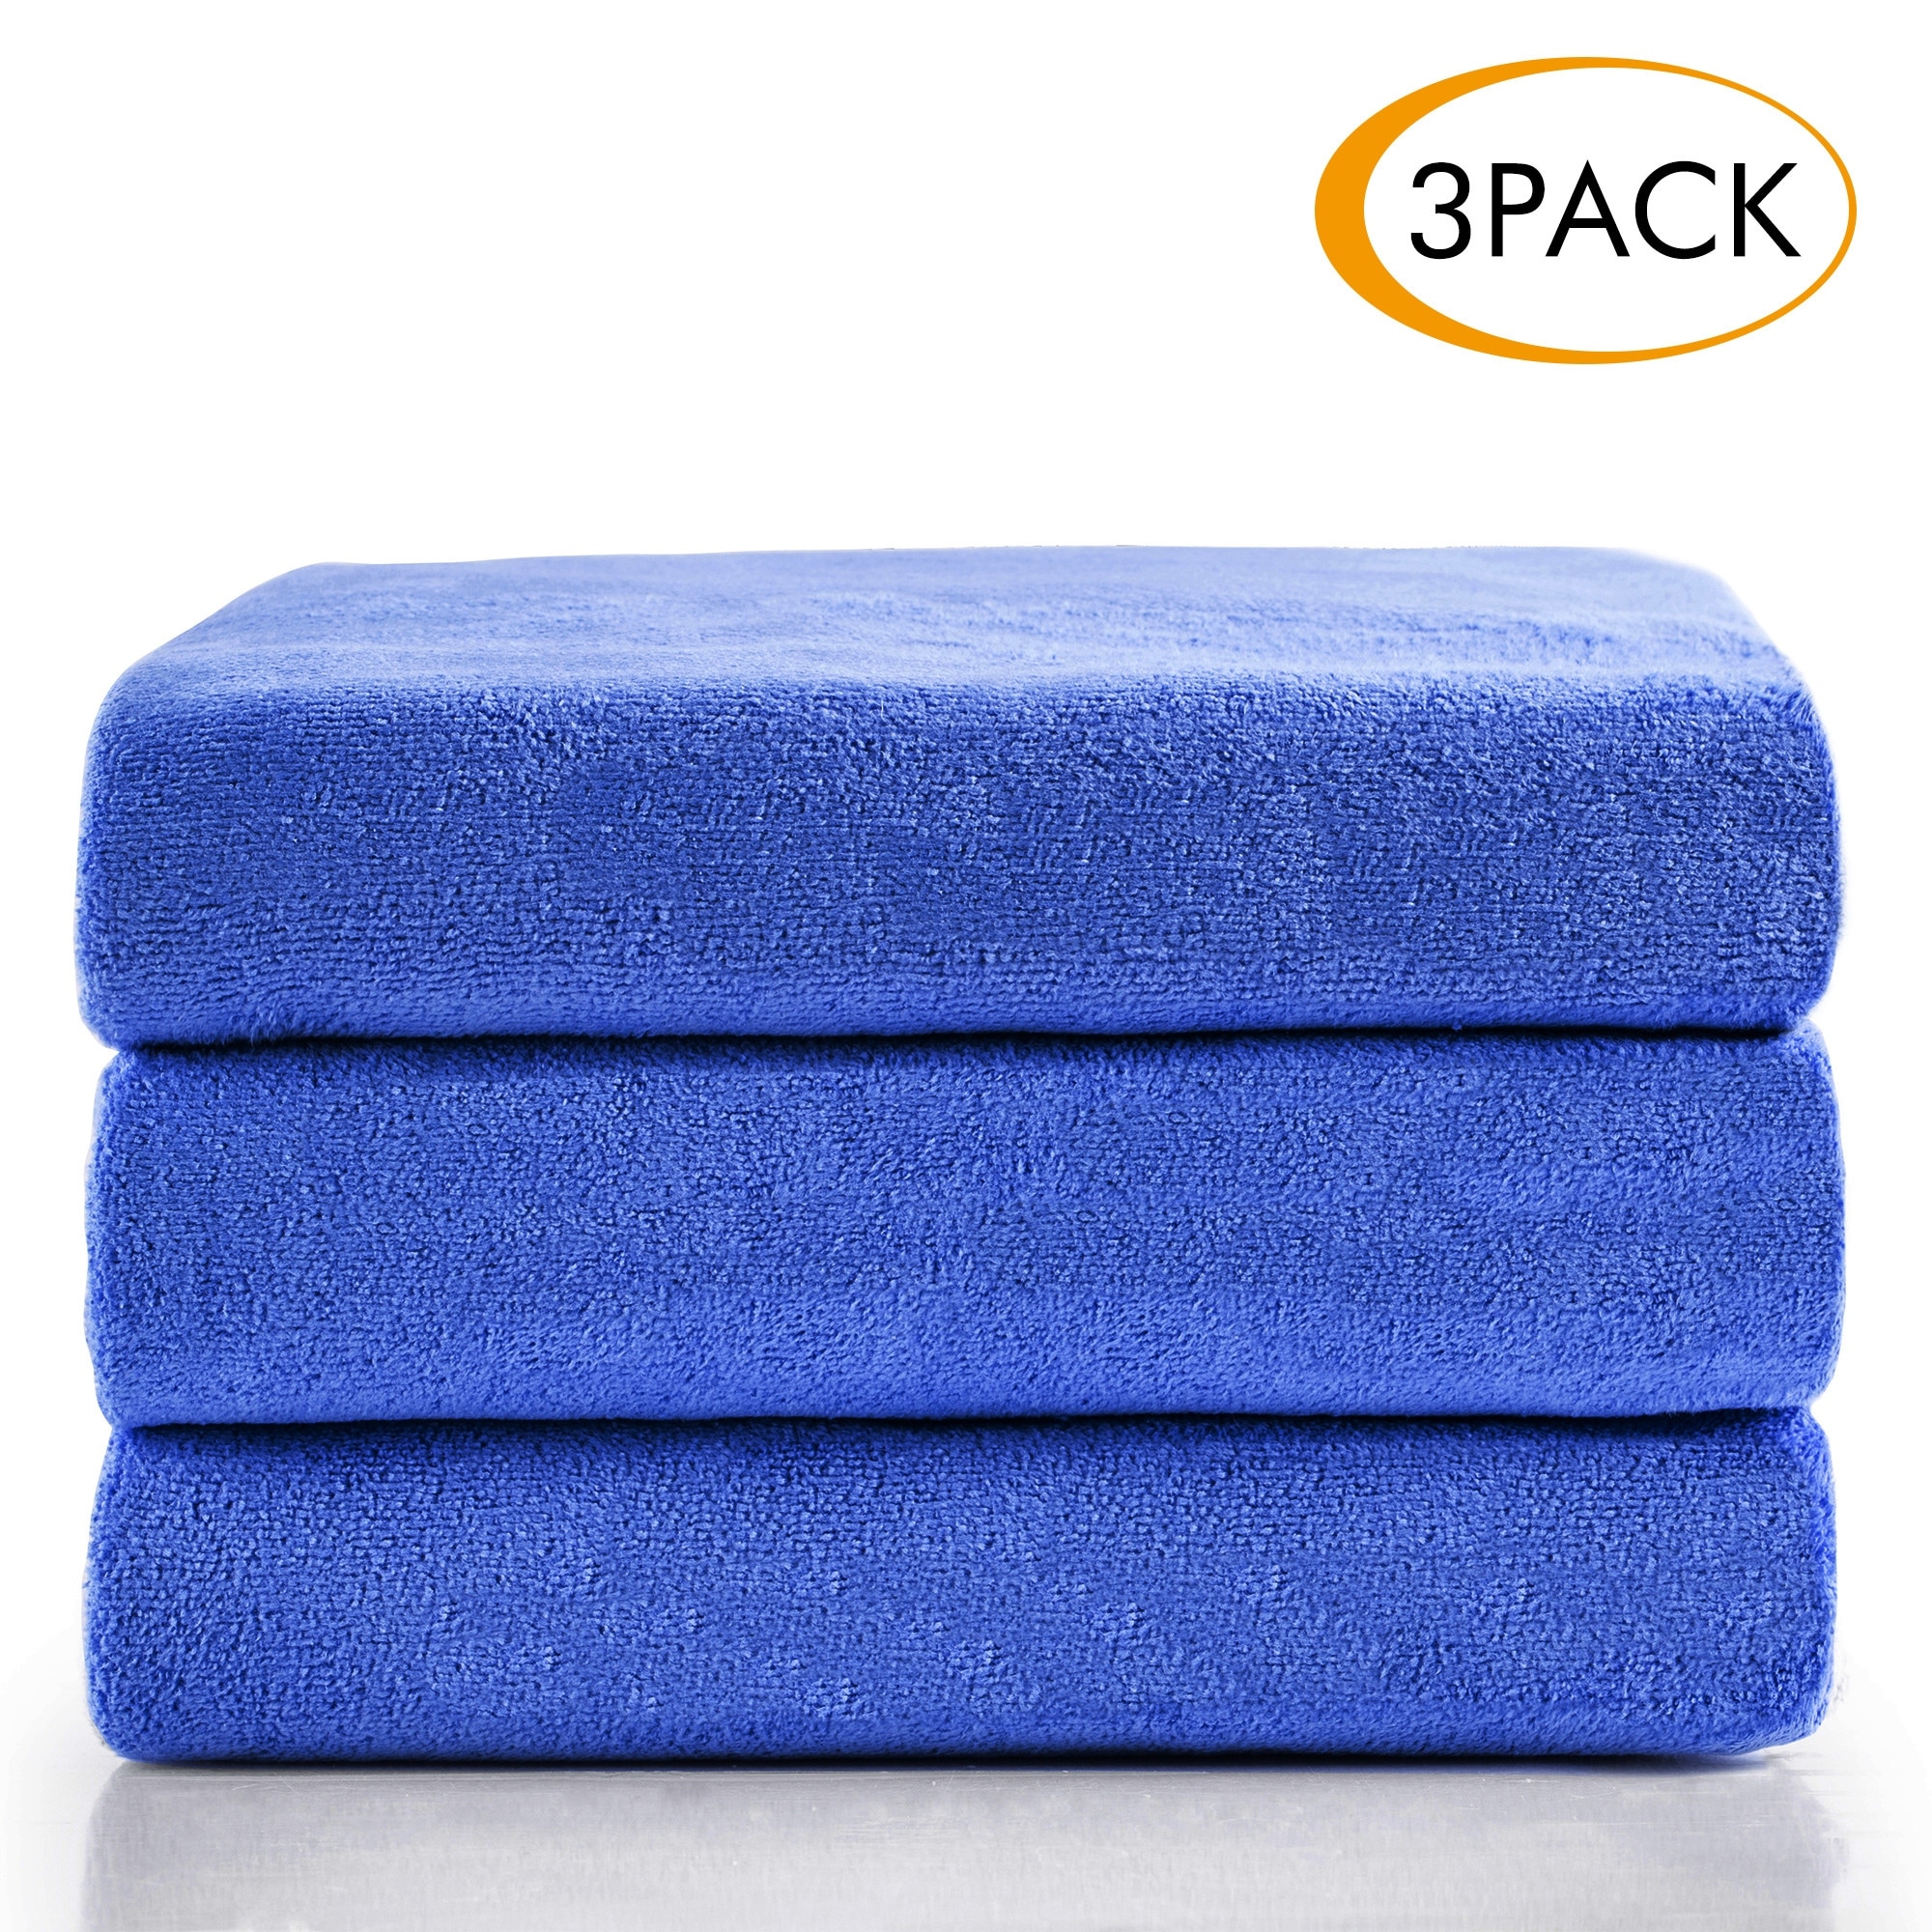 Bath Towel Set(6 Pack,27 x 55) Absorbent,Fast Drying Towels for